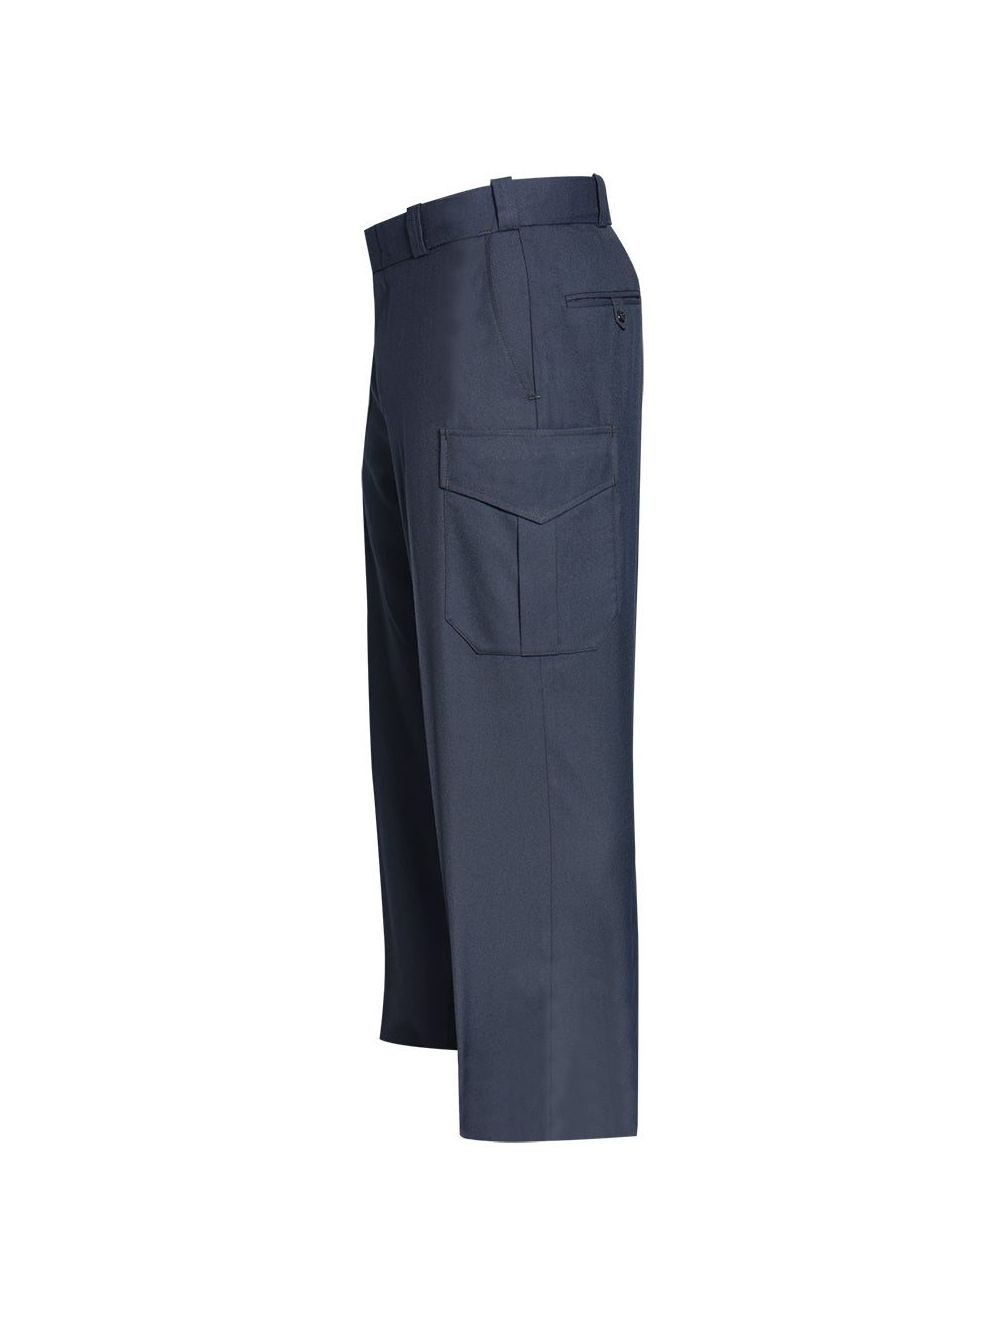 Justice Women's Pants w/ Cargo Pockets - LAPD Navy